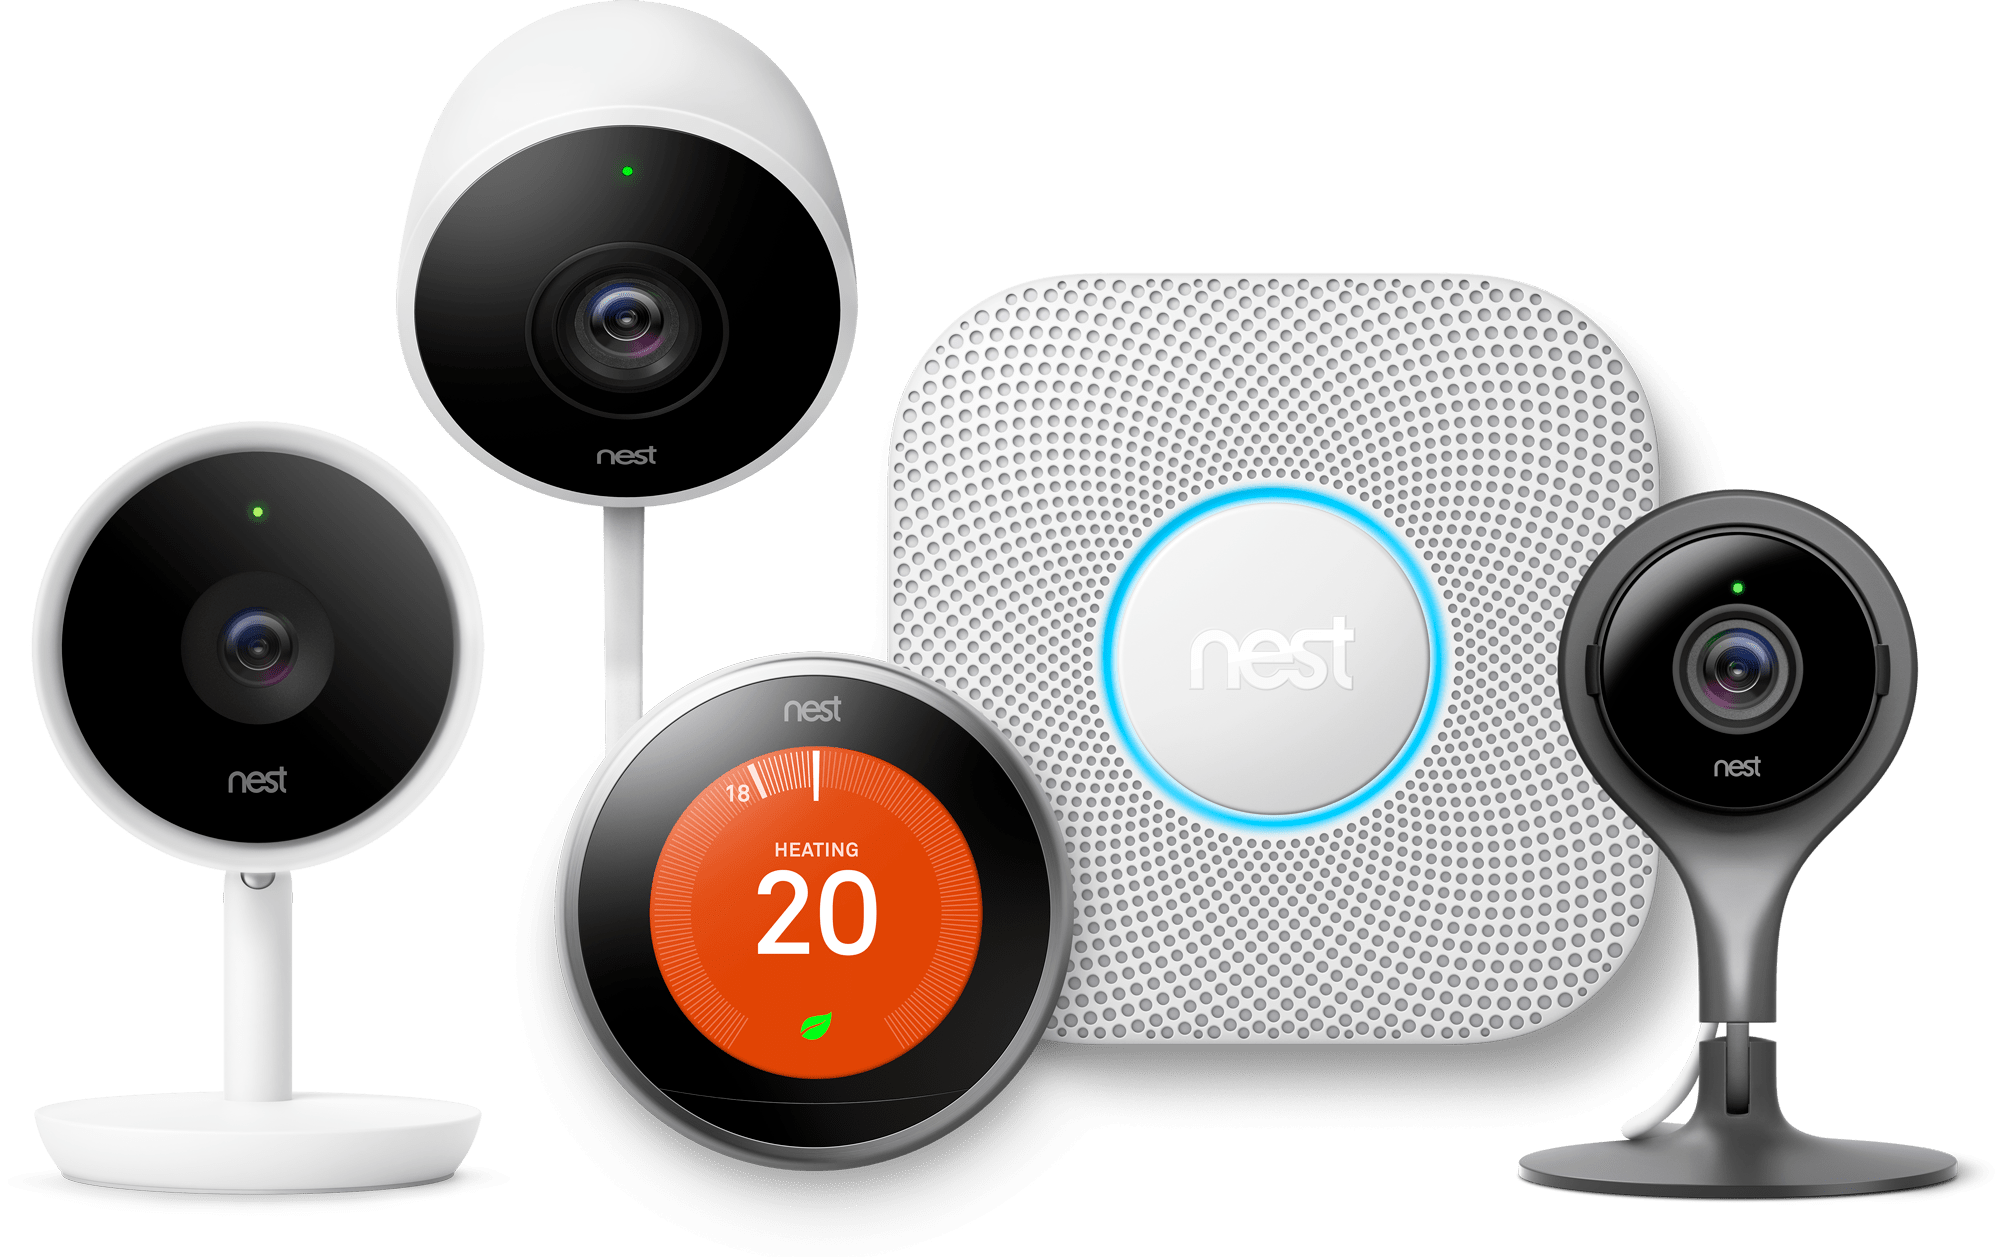 Google Nest Devices Installer. in the image are google nest devices like cctv cameras, thermostat and carbon monoxide alarm.